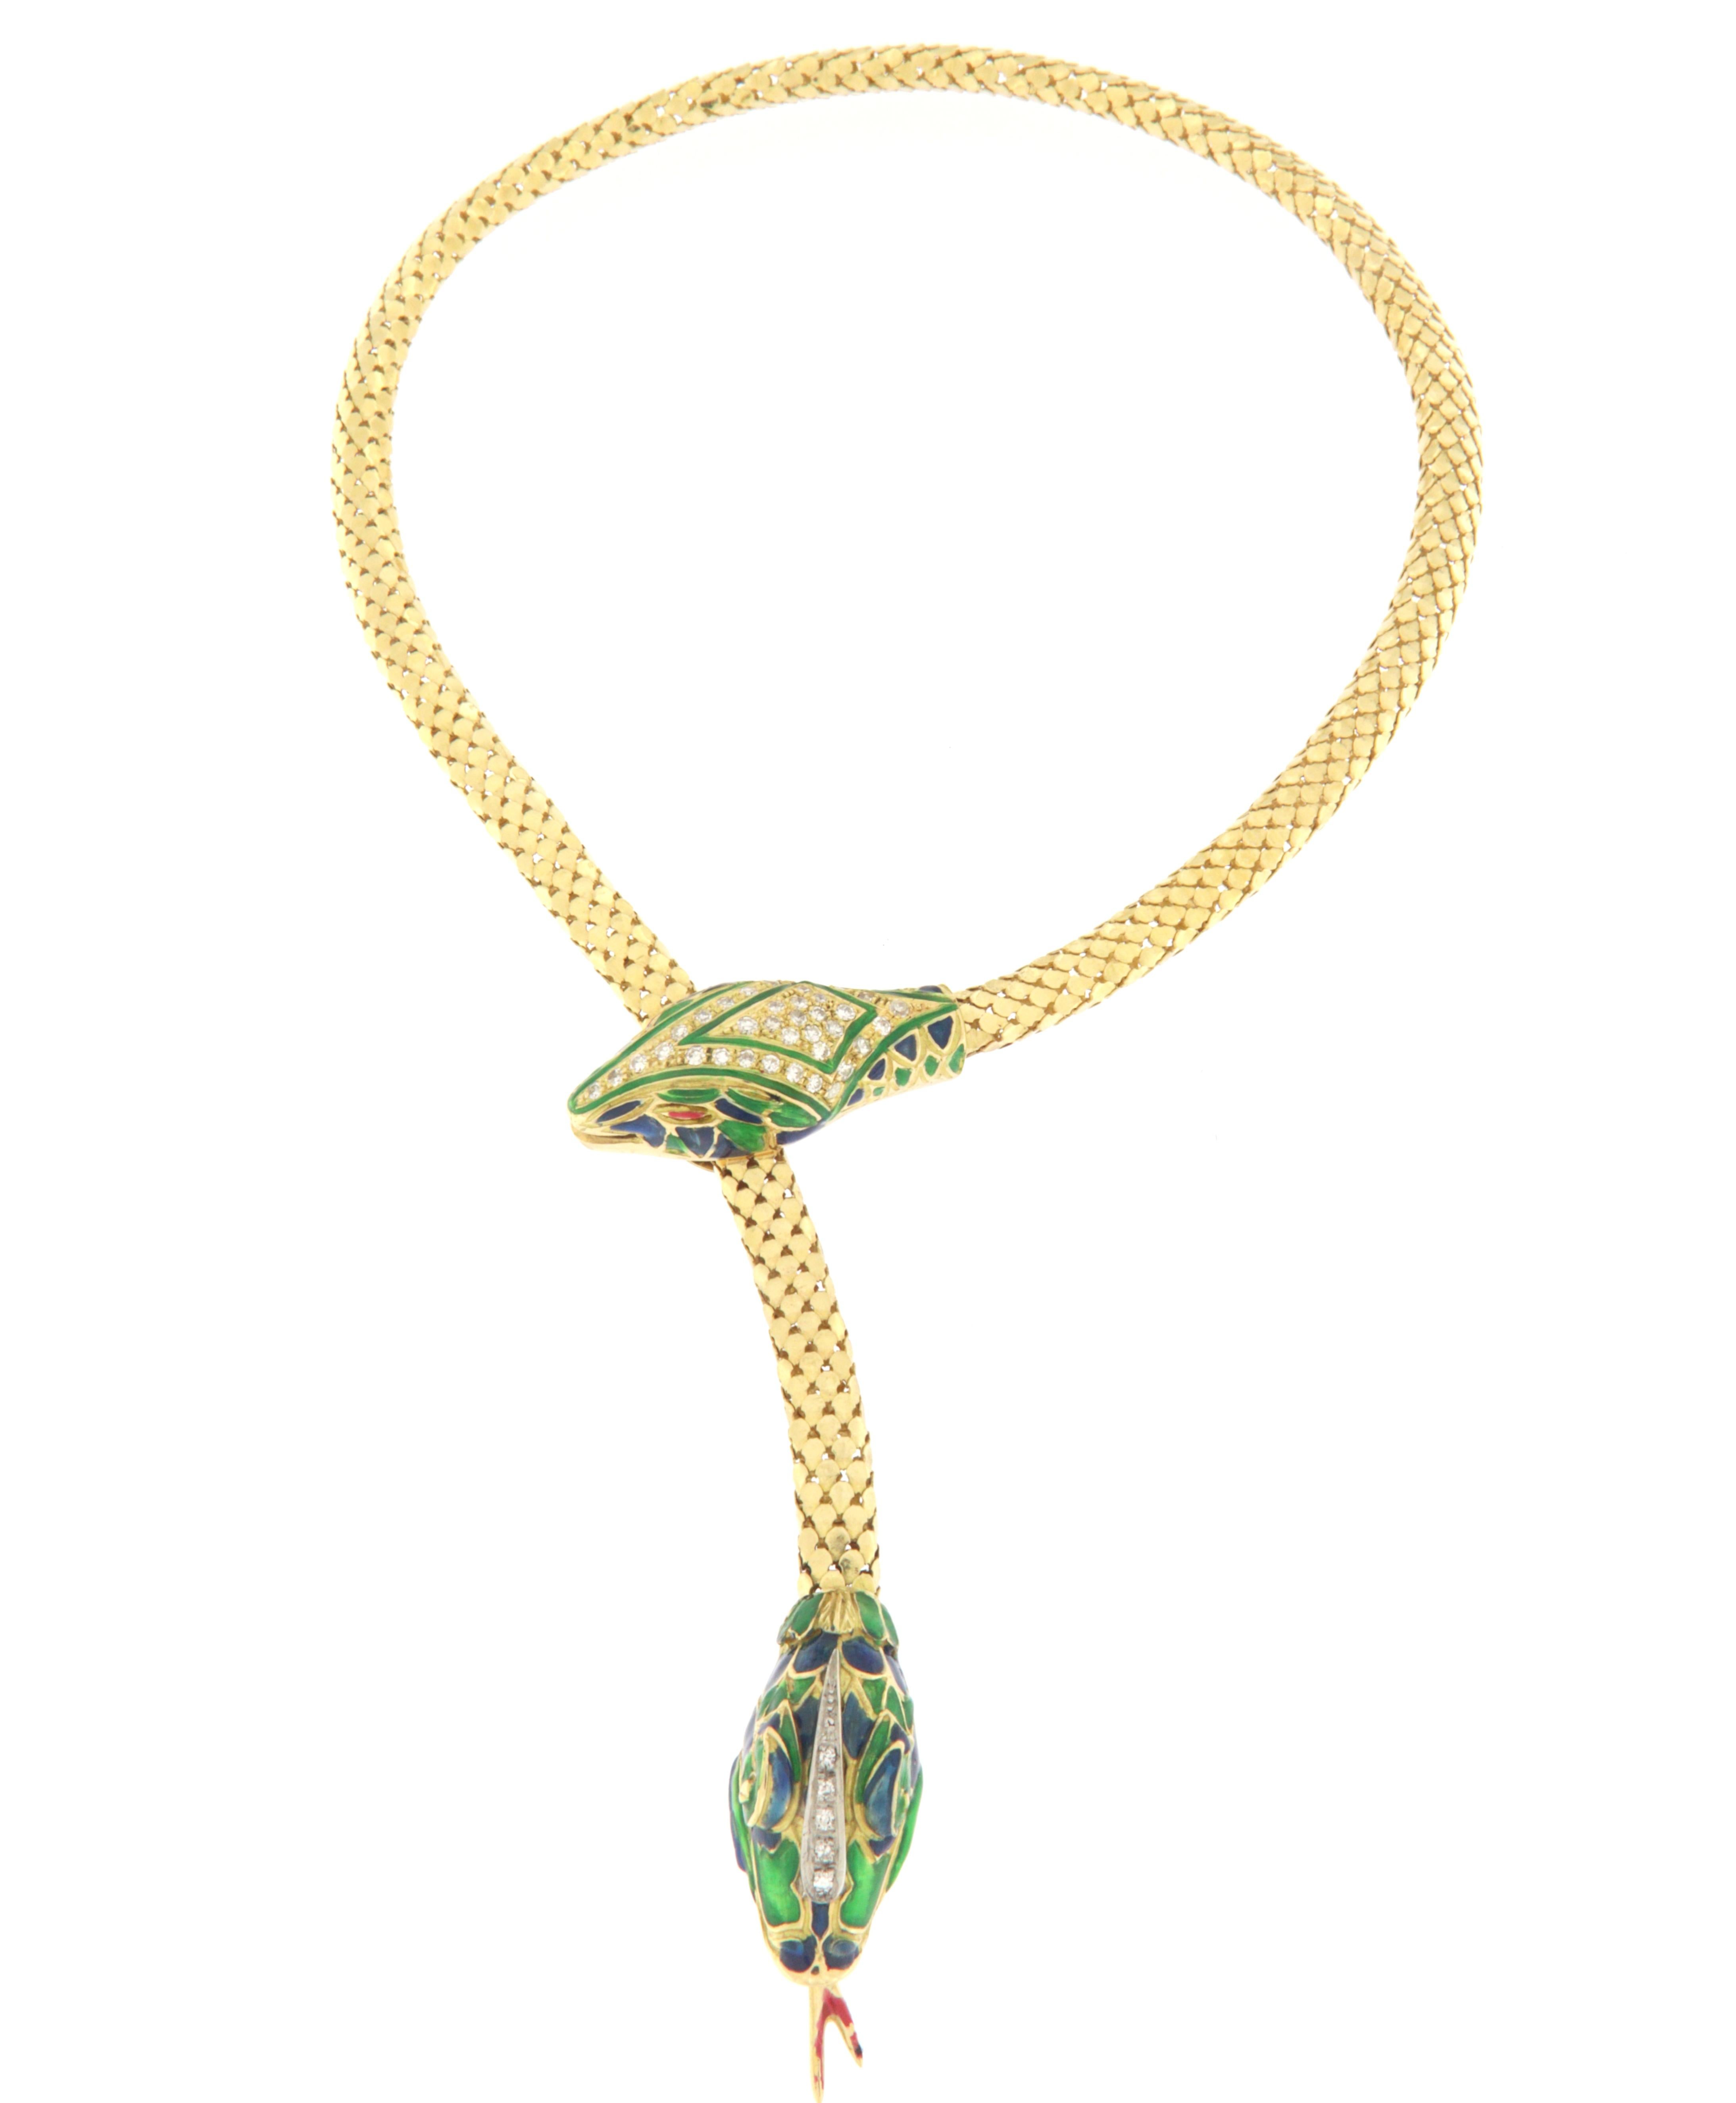 Beautiful snake necklace in 18 karat yellow gold. Handmade by craftsmen assembled with diamonds and green,blue and red enamel.

Diamonds weight 1.15 karat
Necklace total weight 69.10 grams
Necklace open 50 cm (Length)